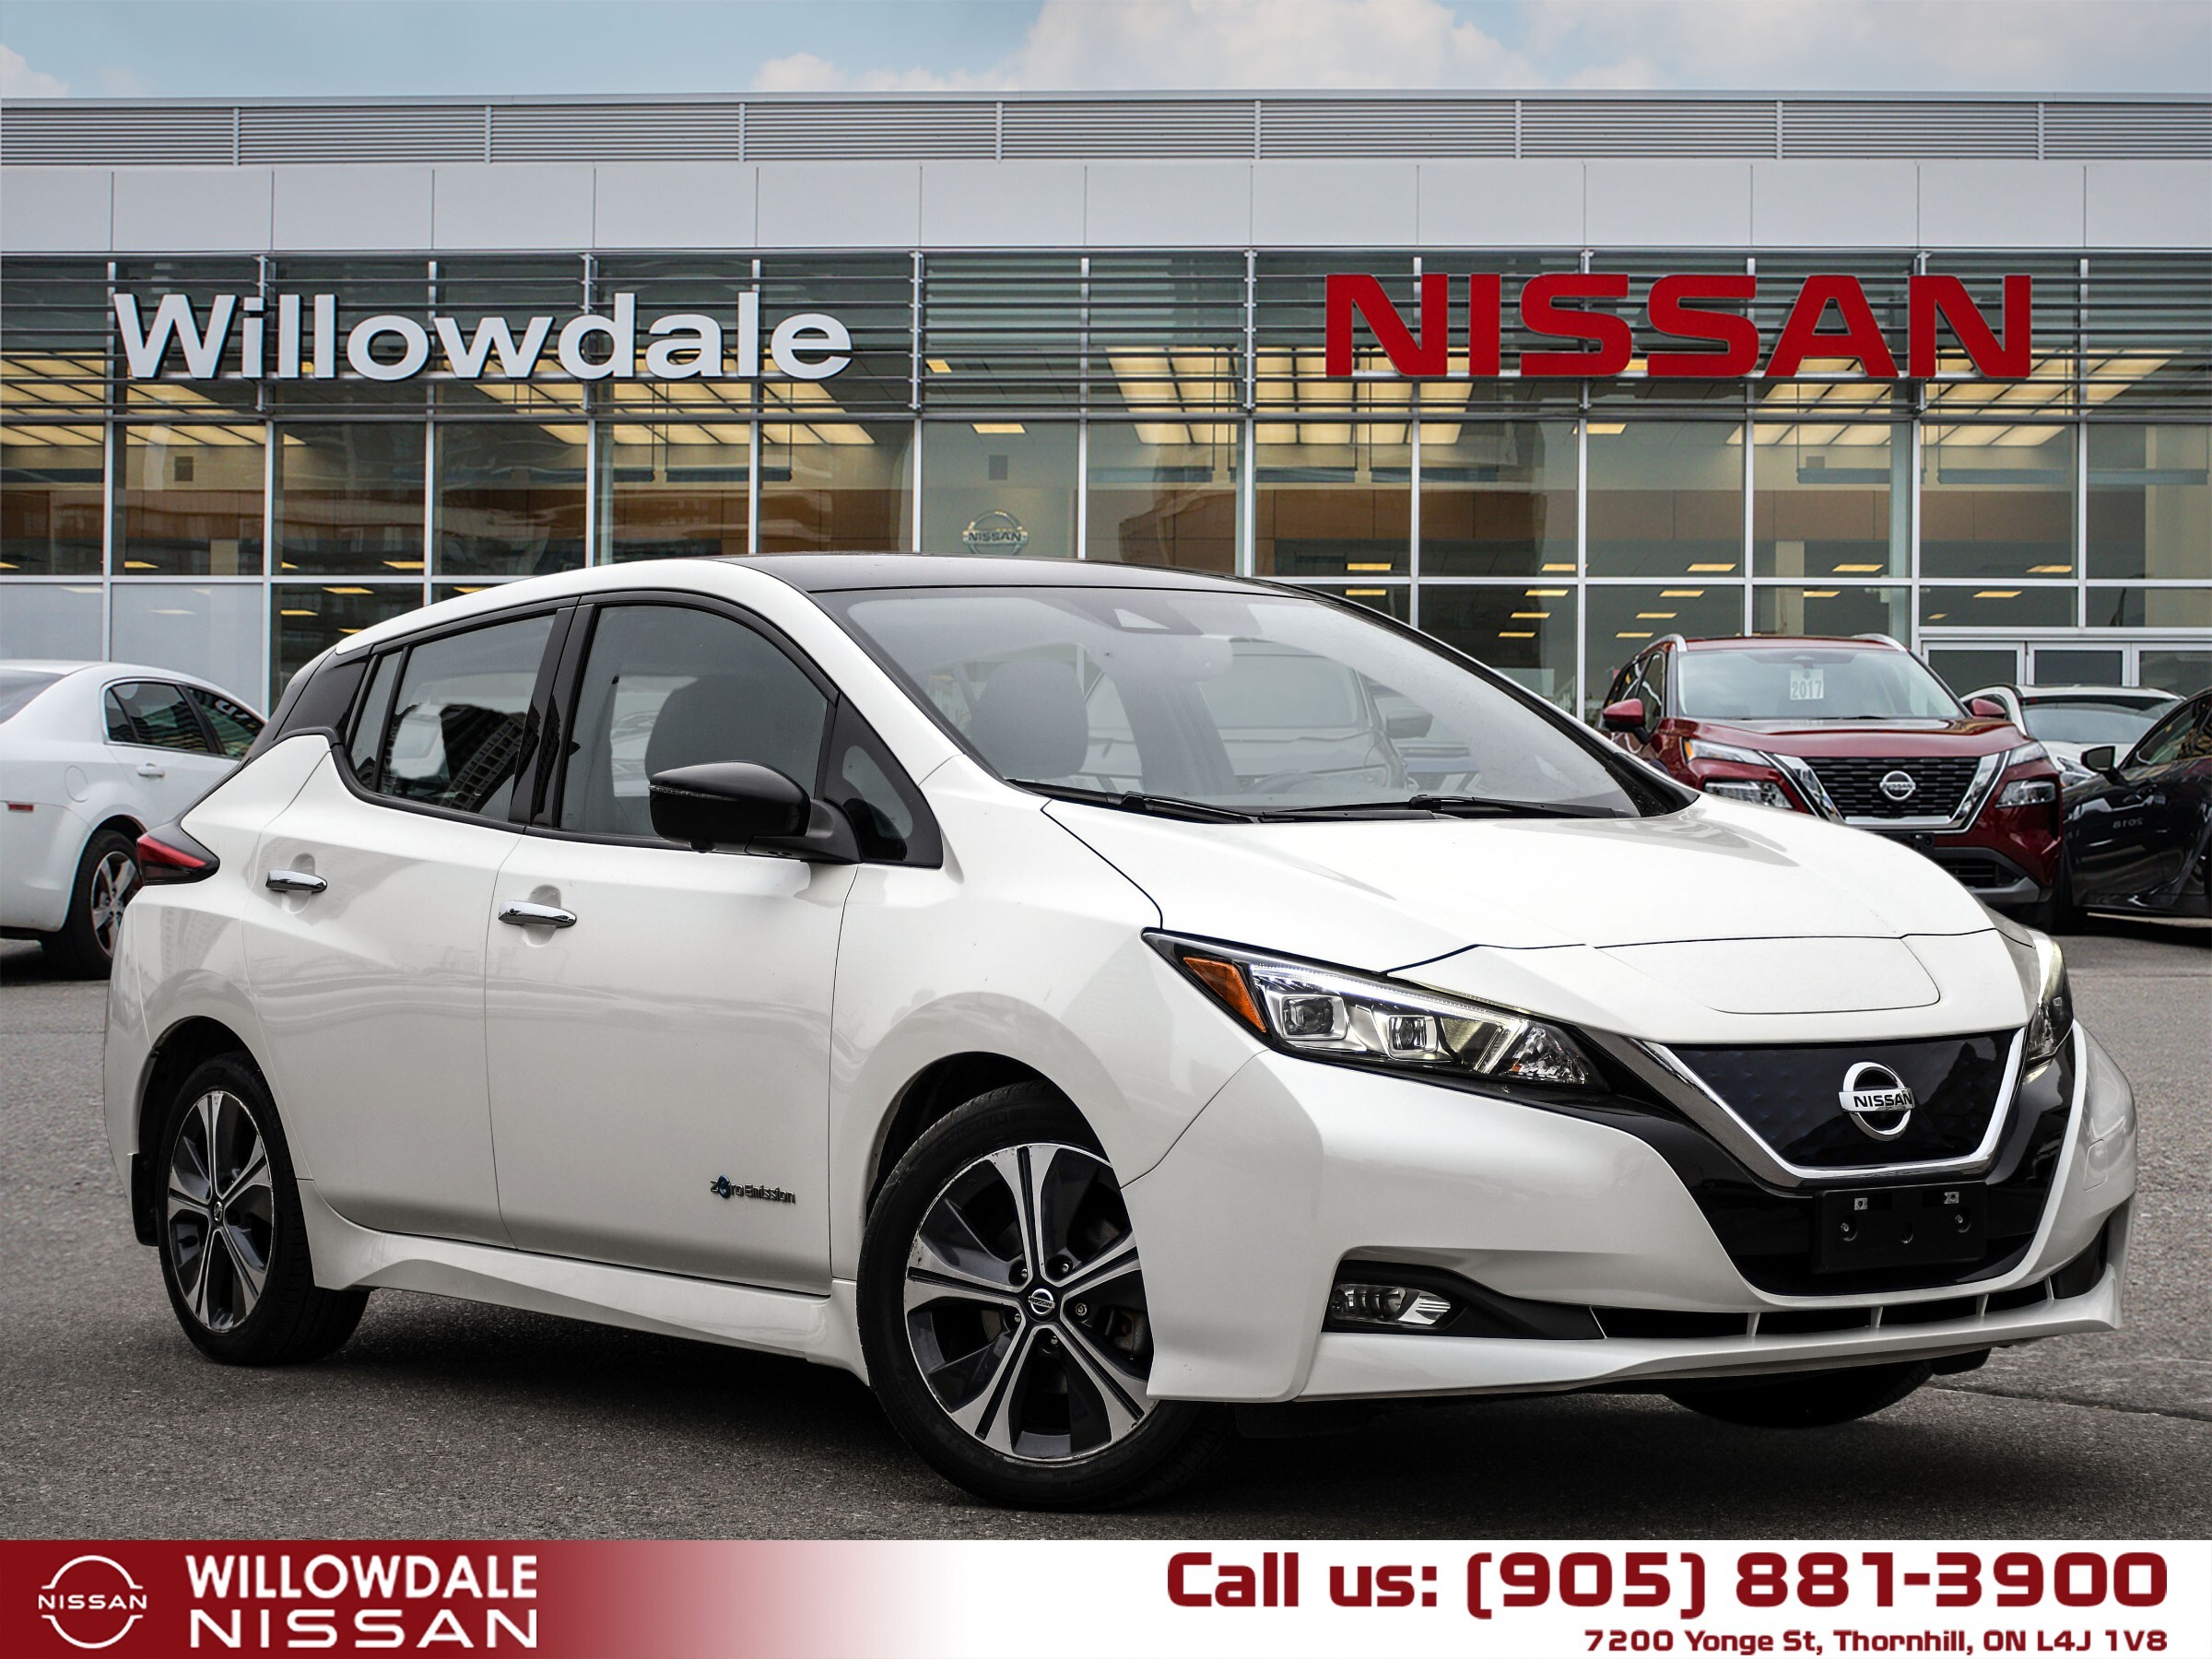 2019 Nissan LEAF SL - SALE EVENT MAY 24- MAY 25